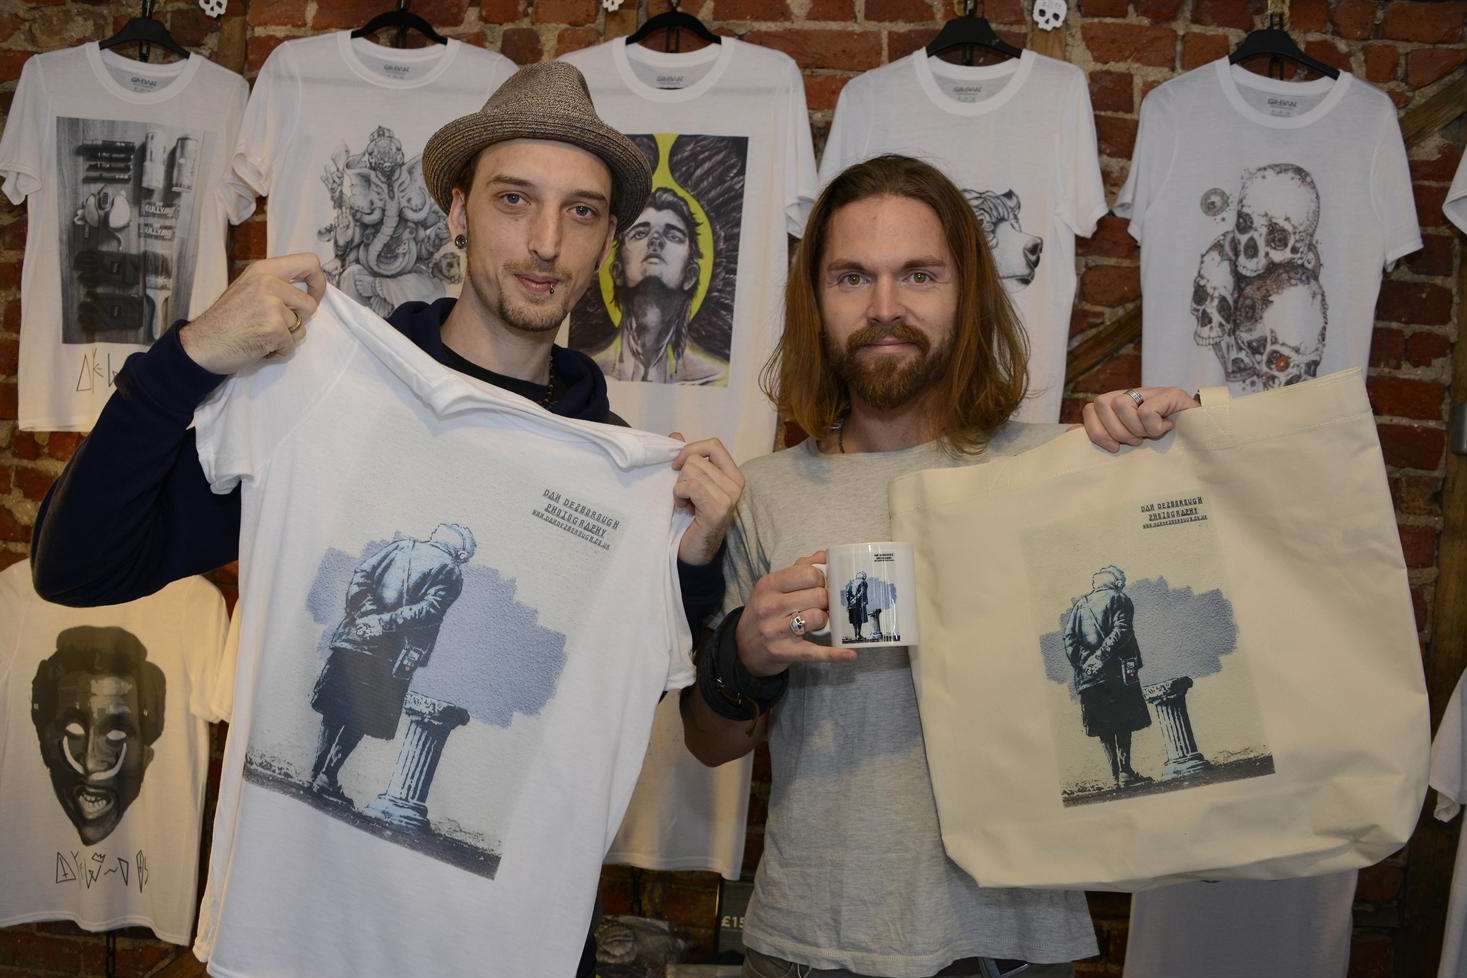 Stephen Bail and Colin White of The Quarter Masters shop in the Old High Street and their Banksy products